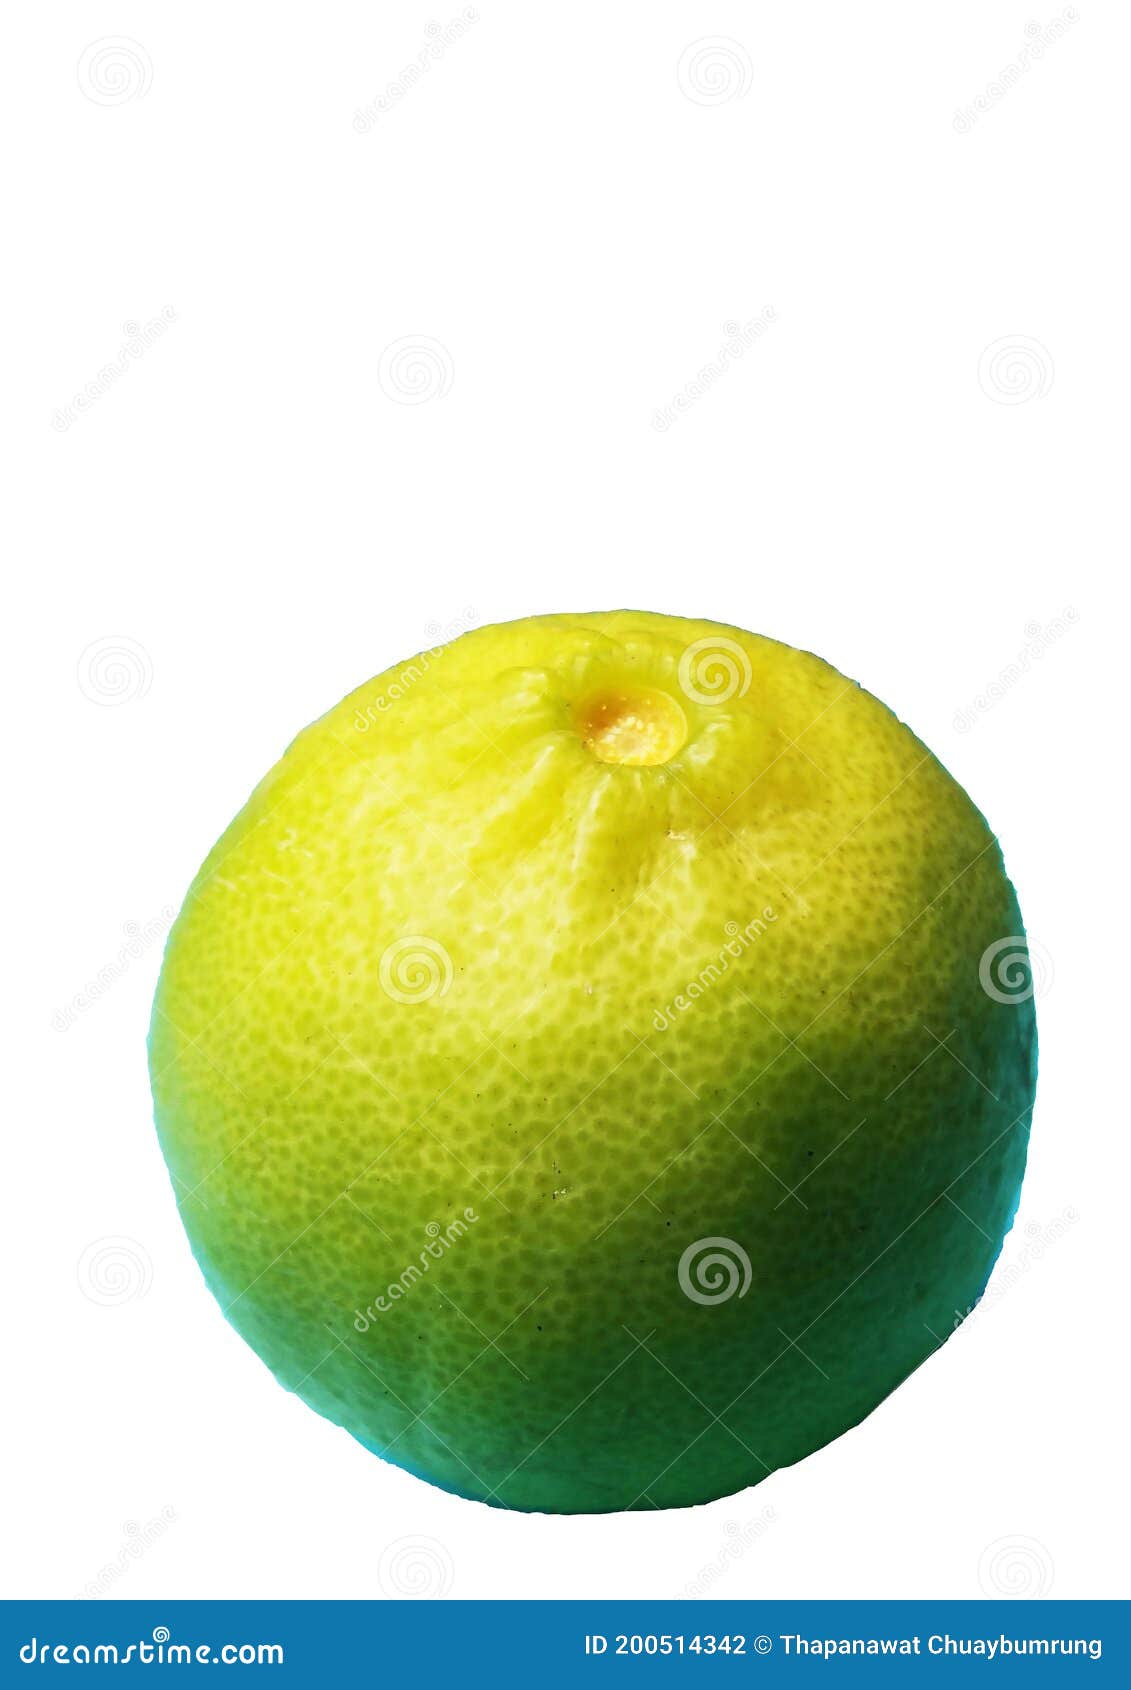 english lime is called mexica lime, west indian lime, and key lime, or short lime.